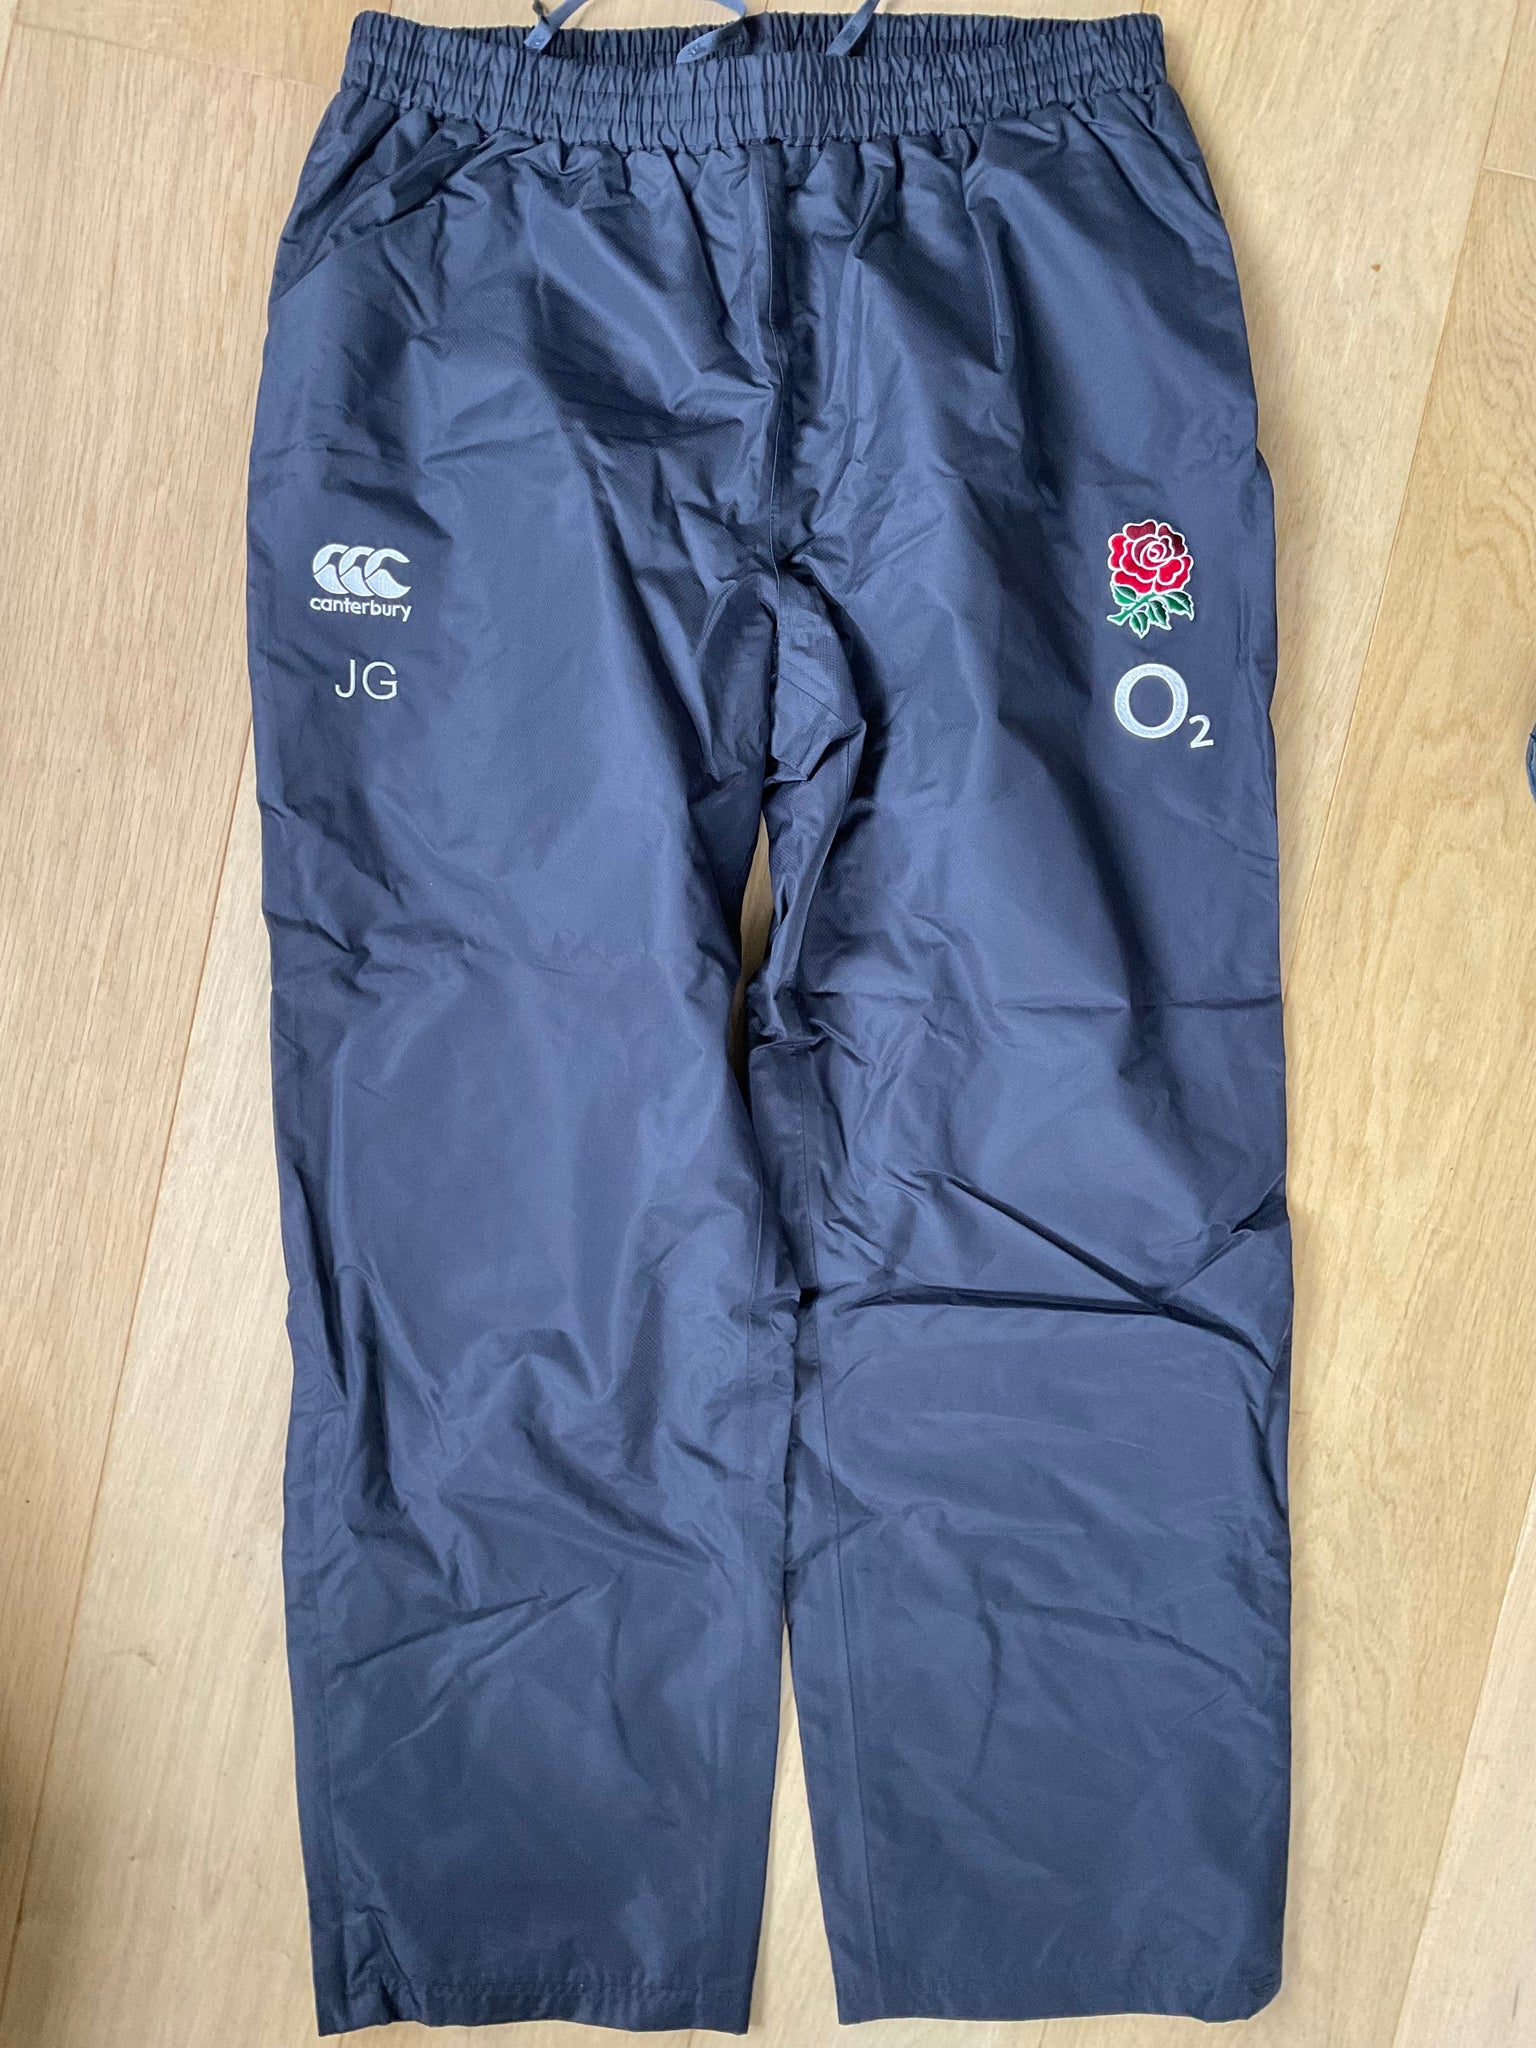 Jamie George - England Rugby Contact Pants [Graphite]